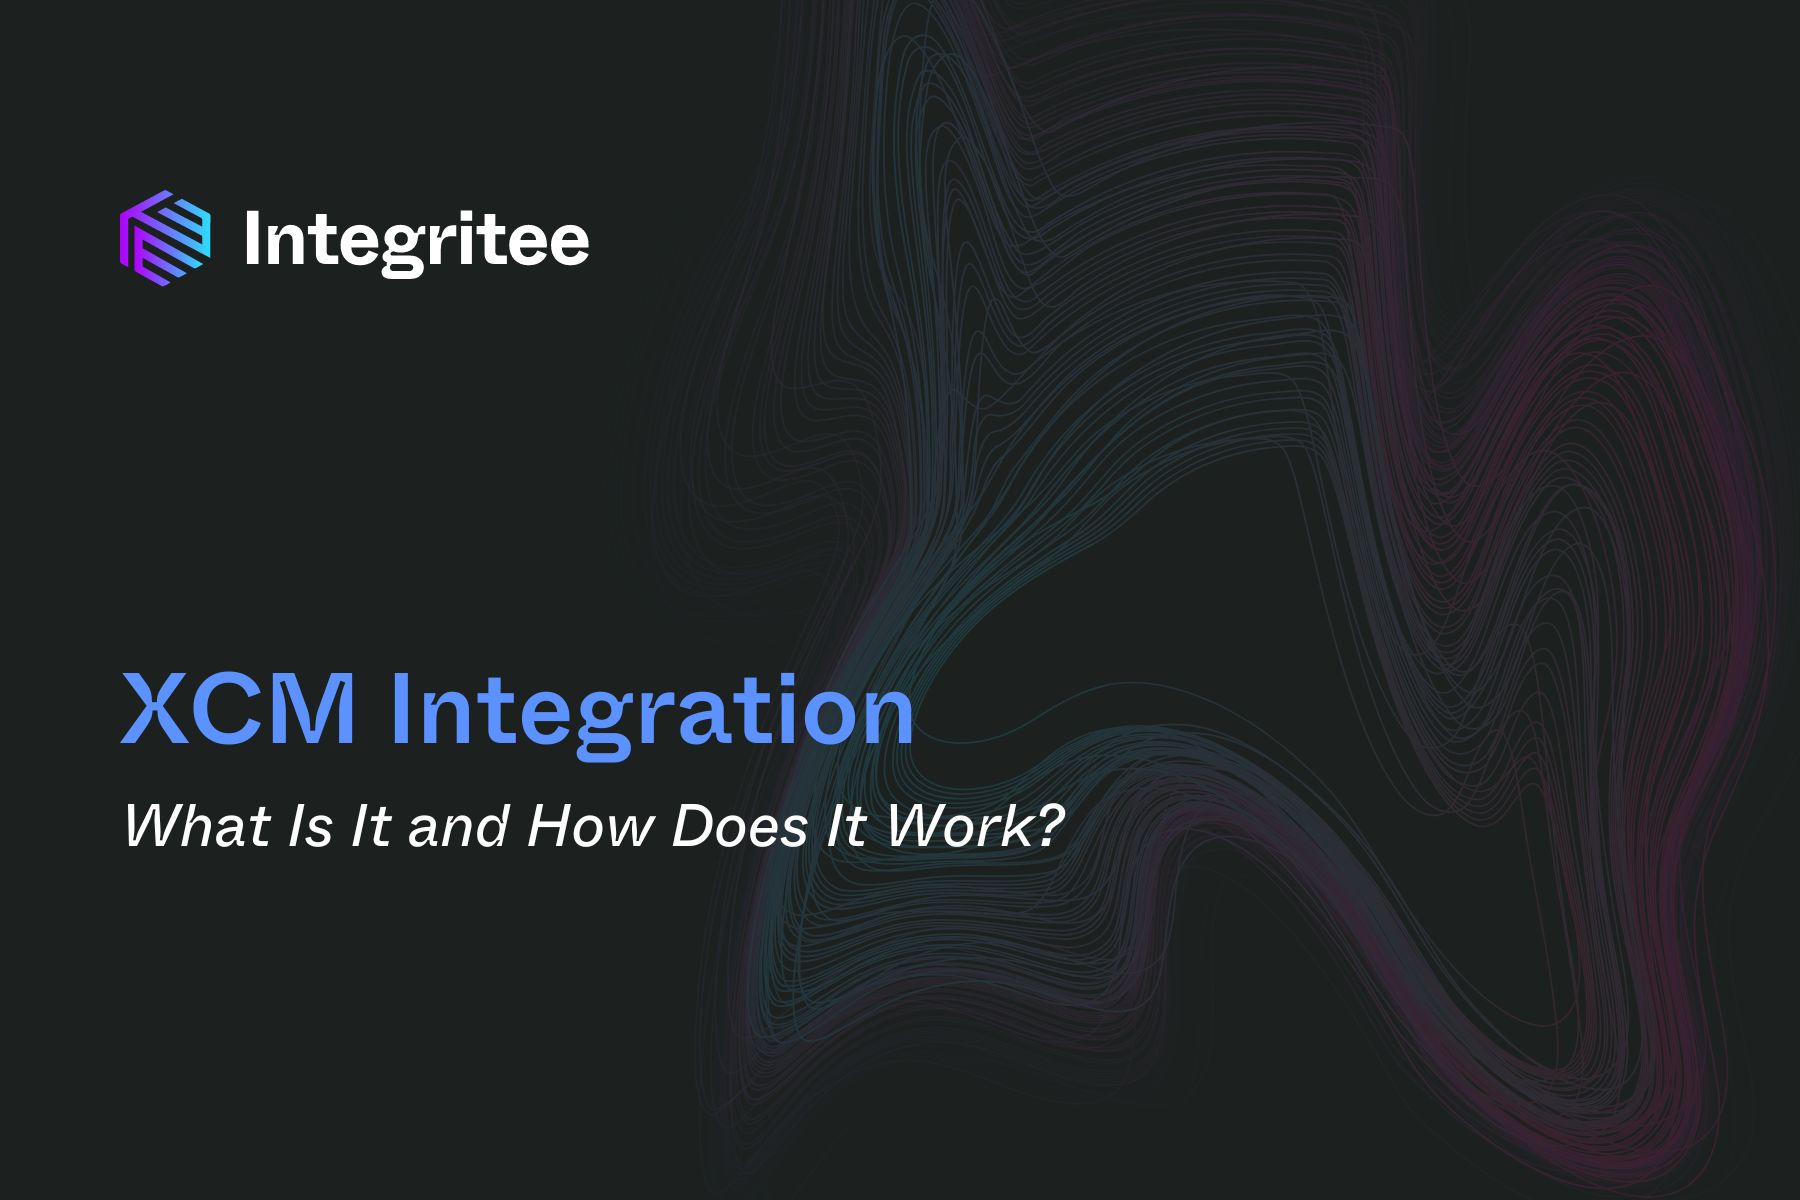 XCM Integration: What Is It and How Does It Work?